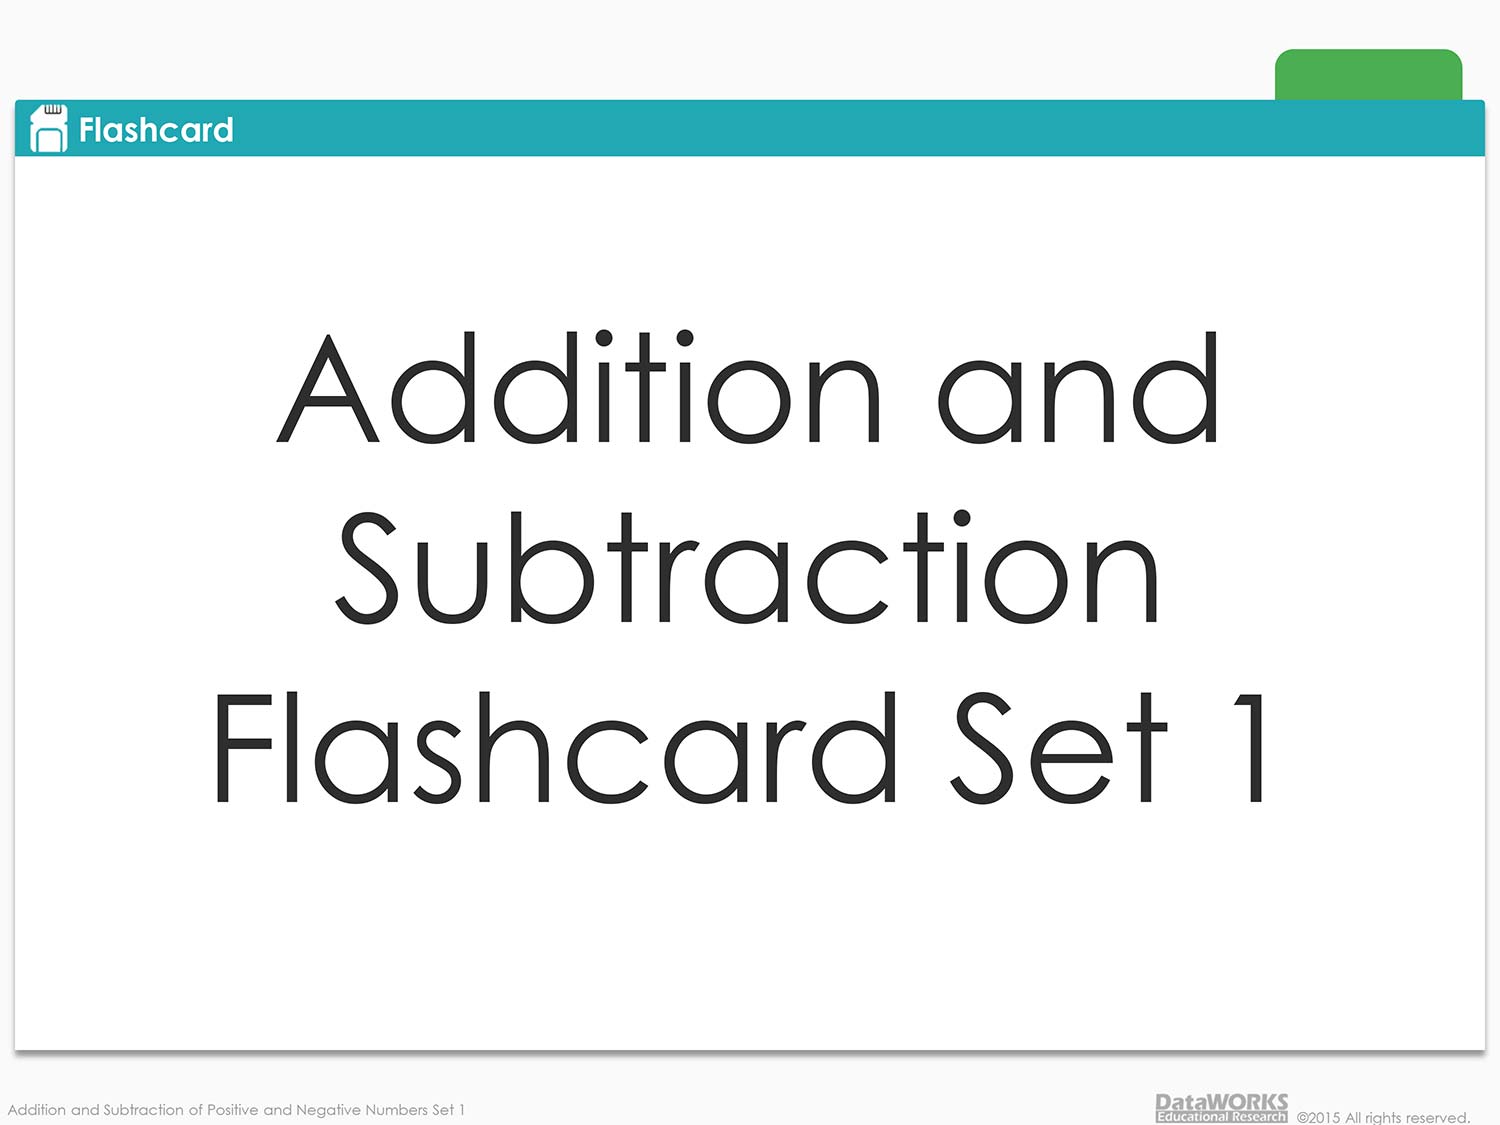 addition-and-subtraction-of-positive-and-negative-numbers-flashcards-set-1-lesson-plans